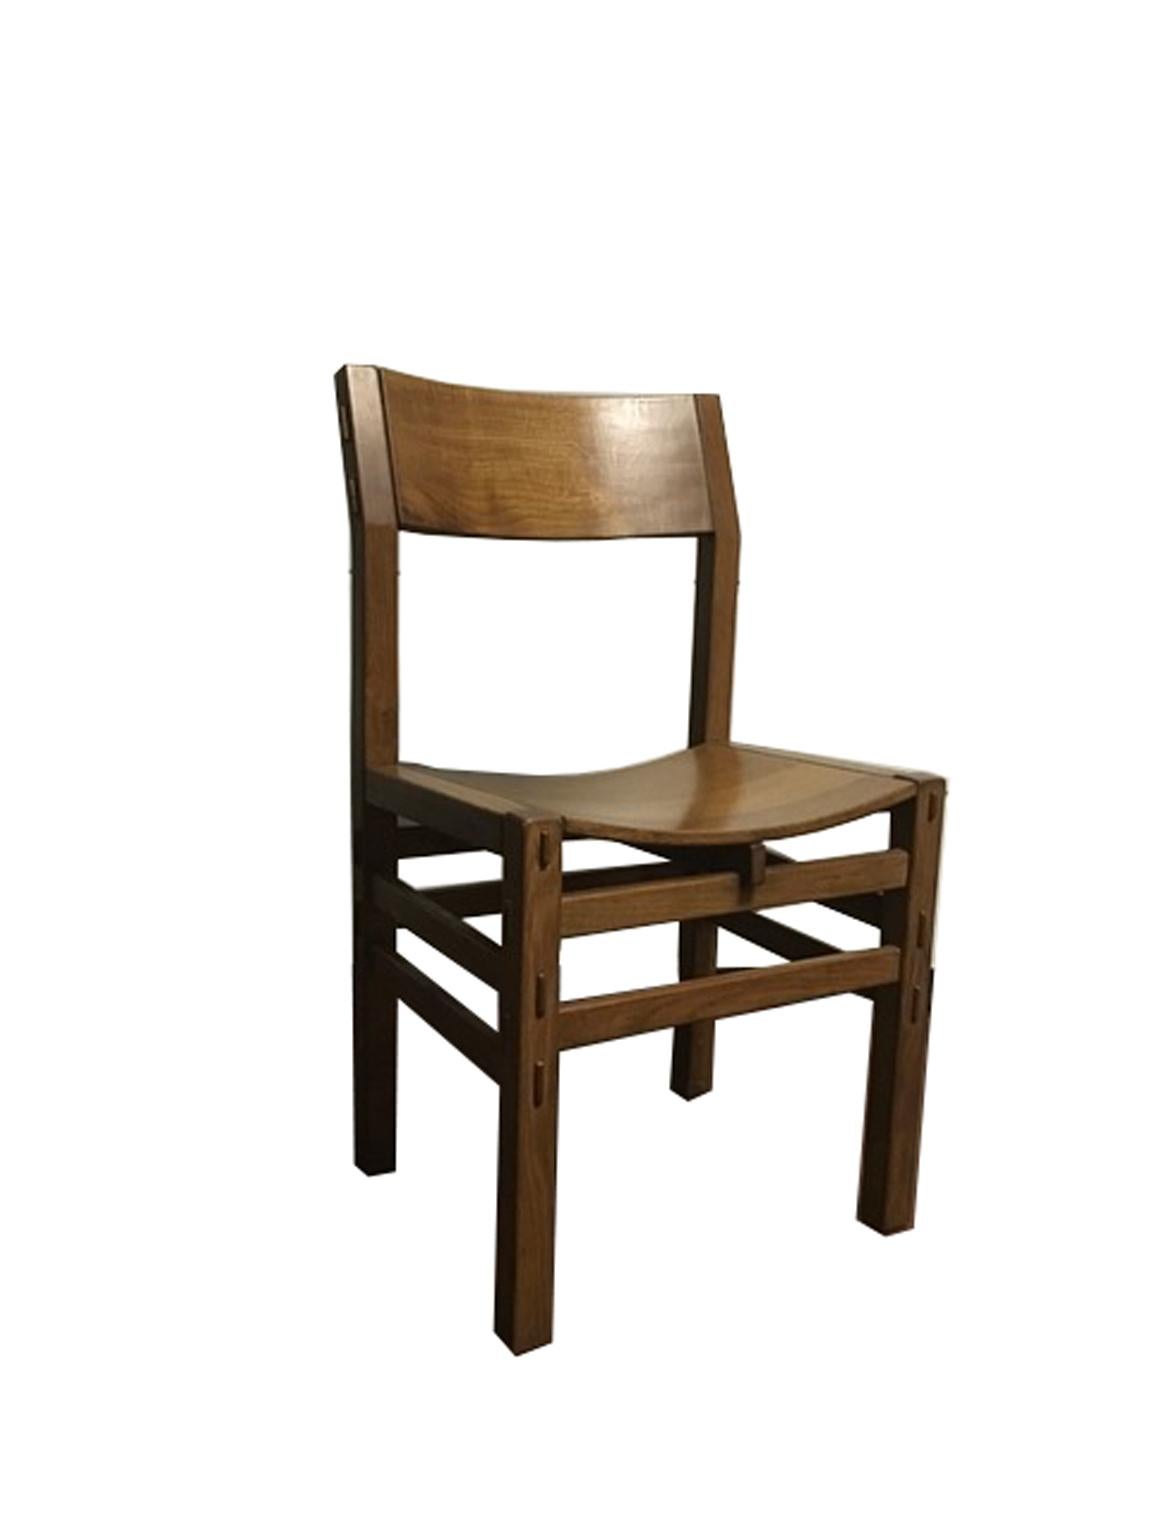 This set of eight dining chairs were made by Officina Rivadossi at the beginning of their history as Officina Rivadossi, a well-known woodworking shop for its high-level furniture, as works of art. Every piece carefully made one by one in solid oak.